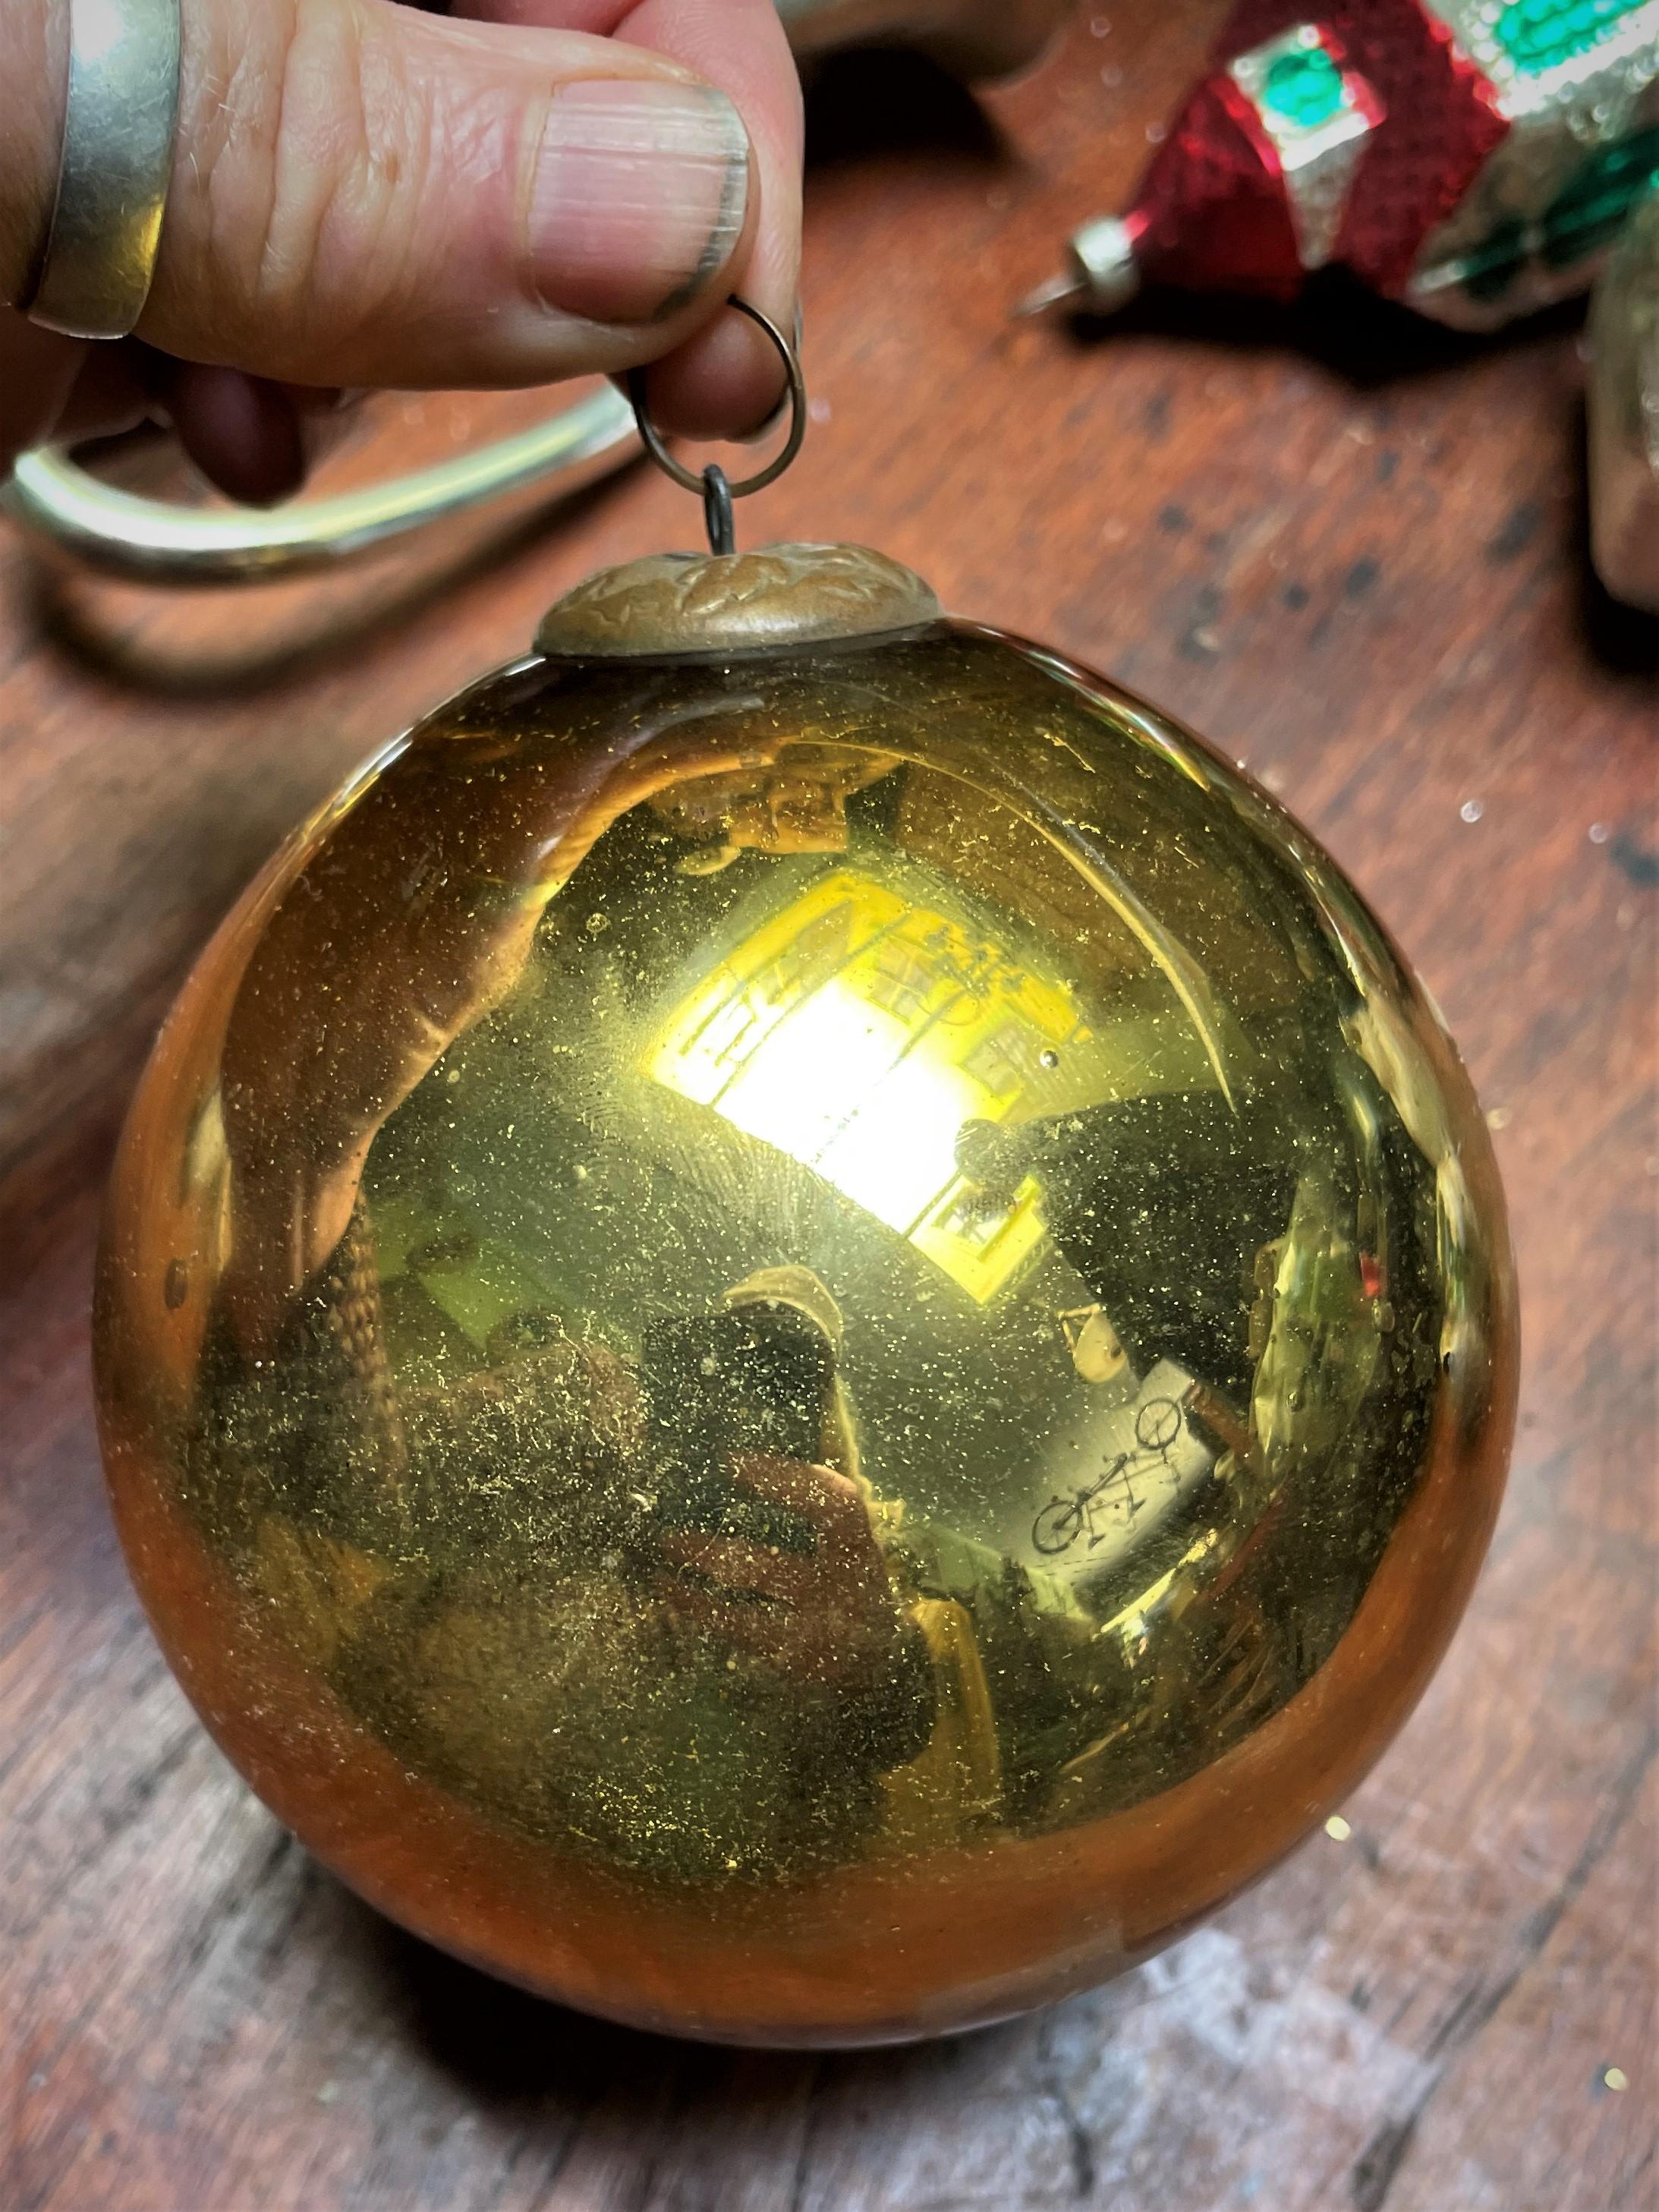 This is a great example of a gold mercury glass German Kugel. Kugels (which means balls in German) originated from witch balls that were glass balls that, in the 17th century, were hung in doorways and windows to ward of witches who were thought to